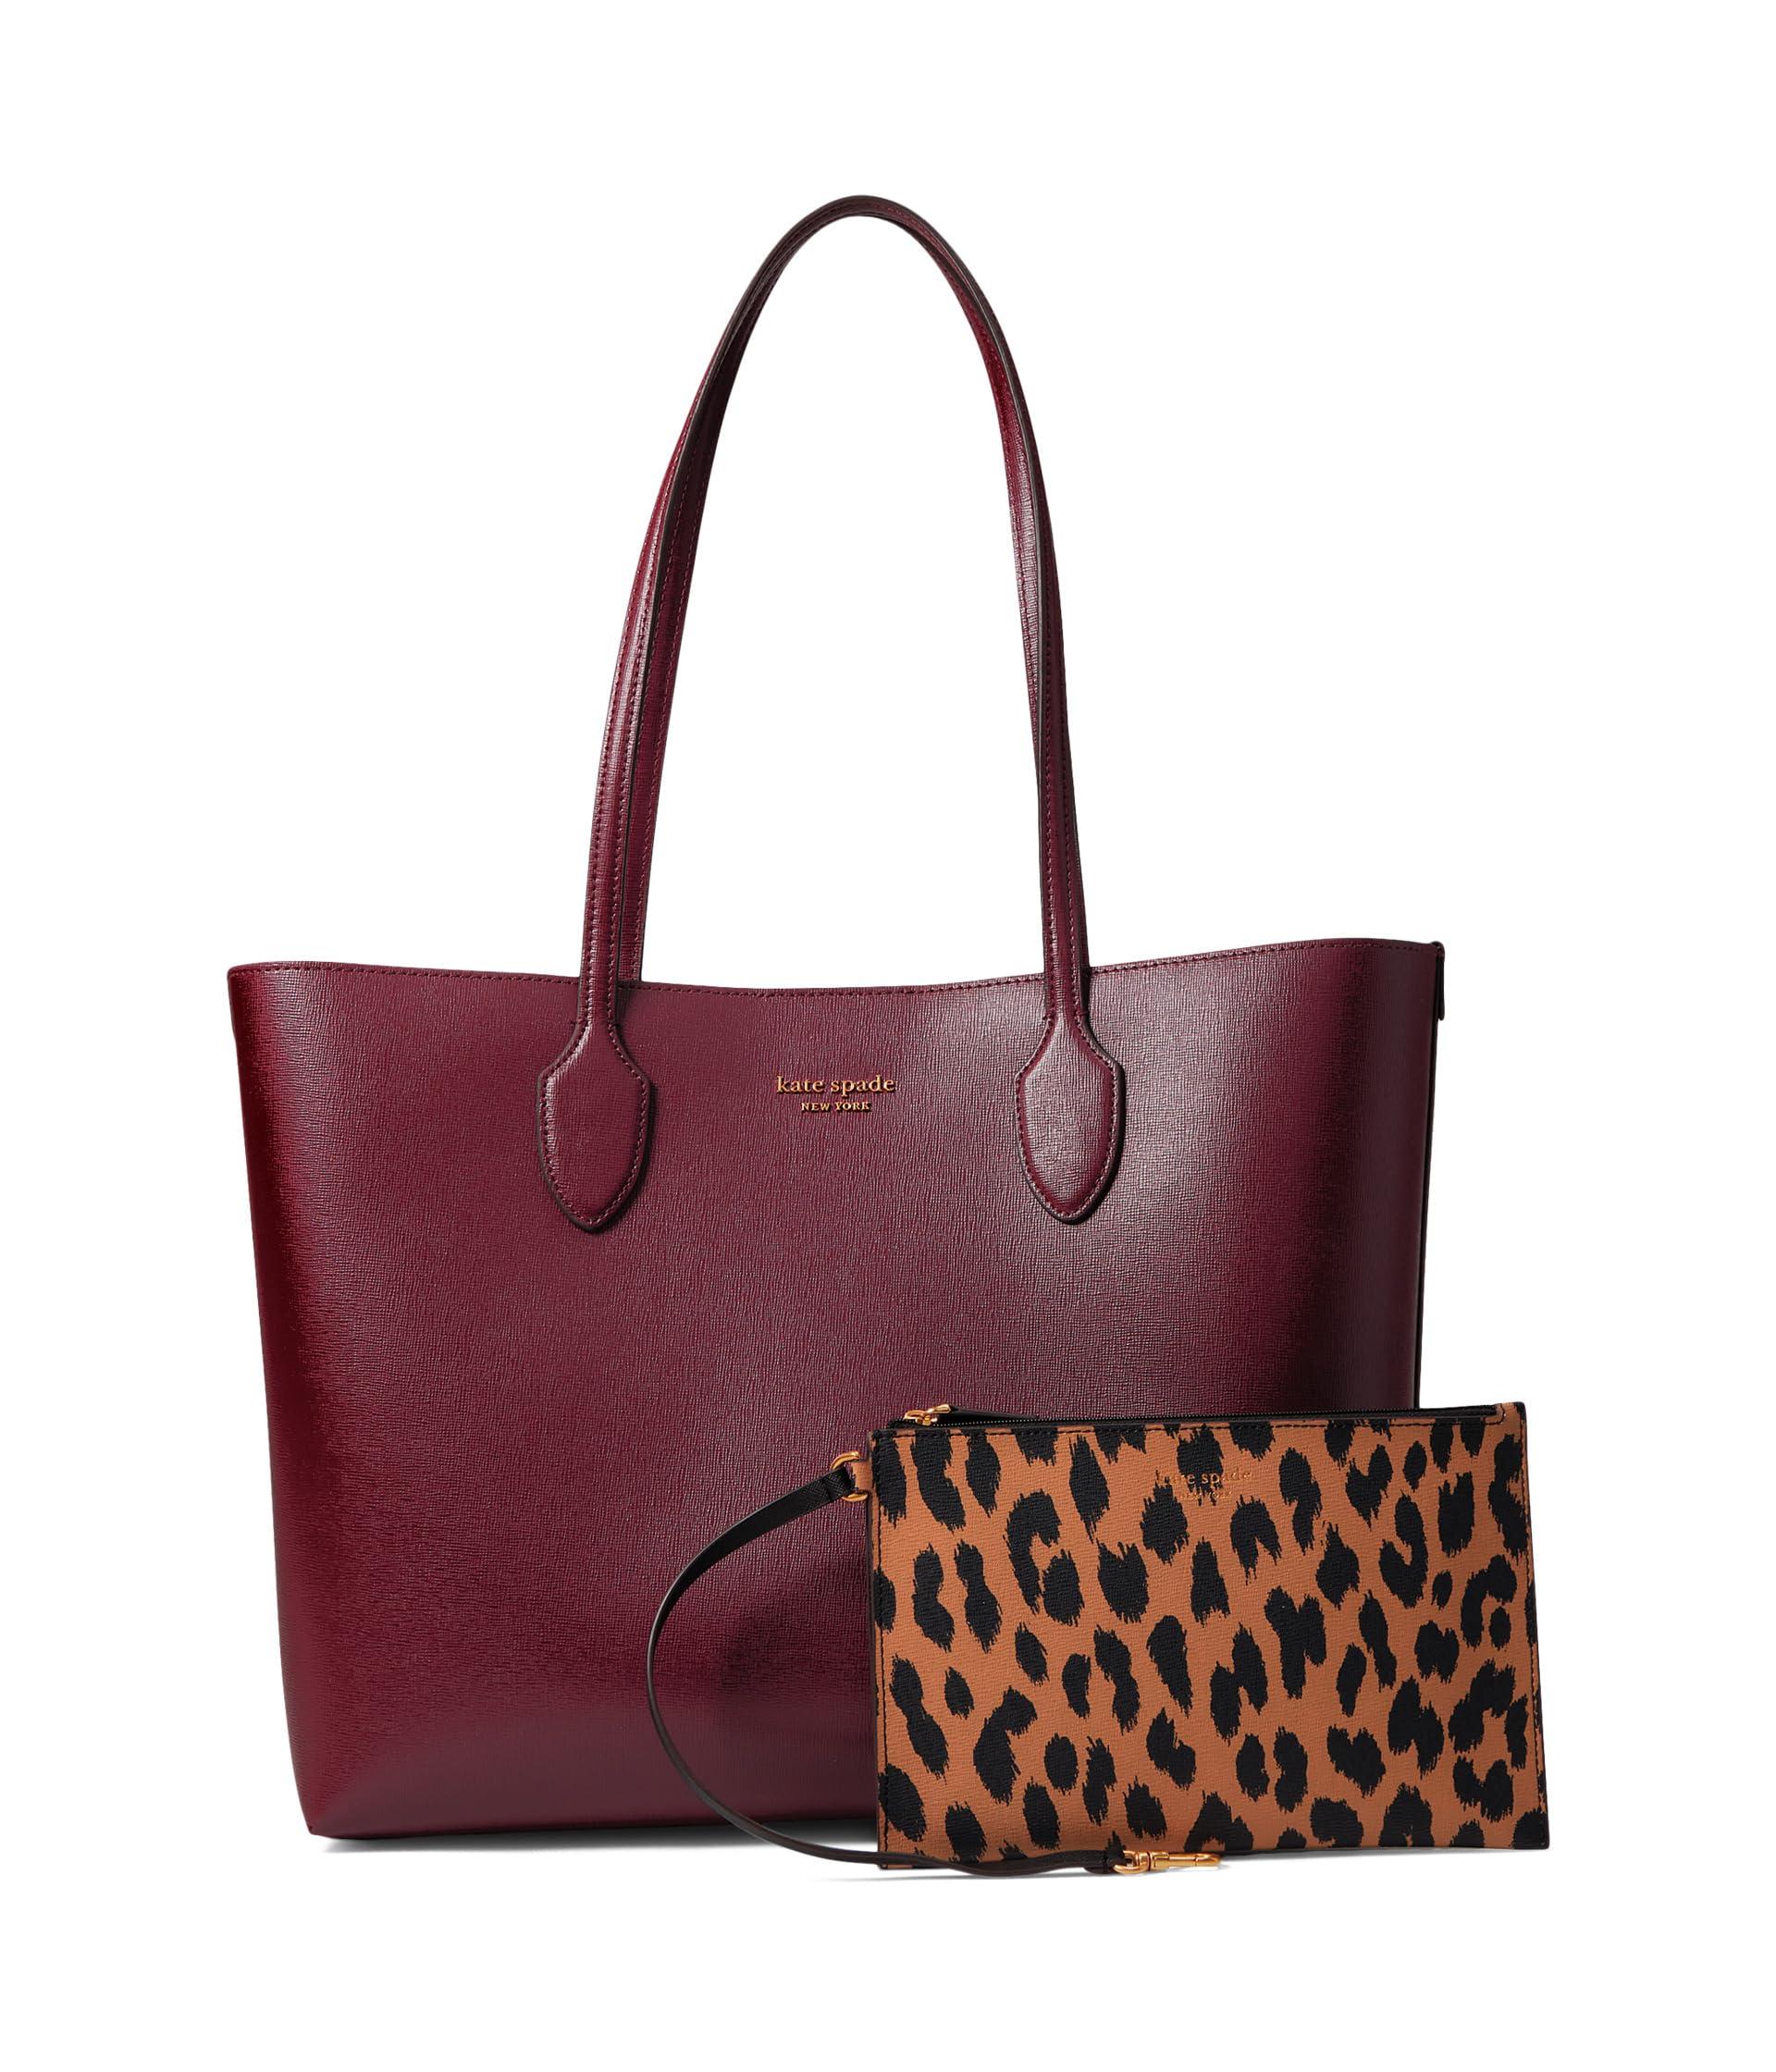 kate spade new york - surprise sale is here but not for long! enjoy up to  75% off during our surprise sale. plus, enjoy free shipping on orders $99  or more. http://bit.ly/2Frh1fS |